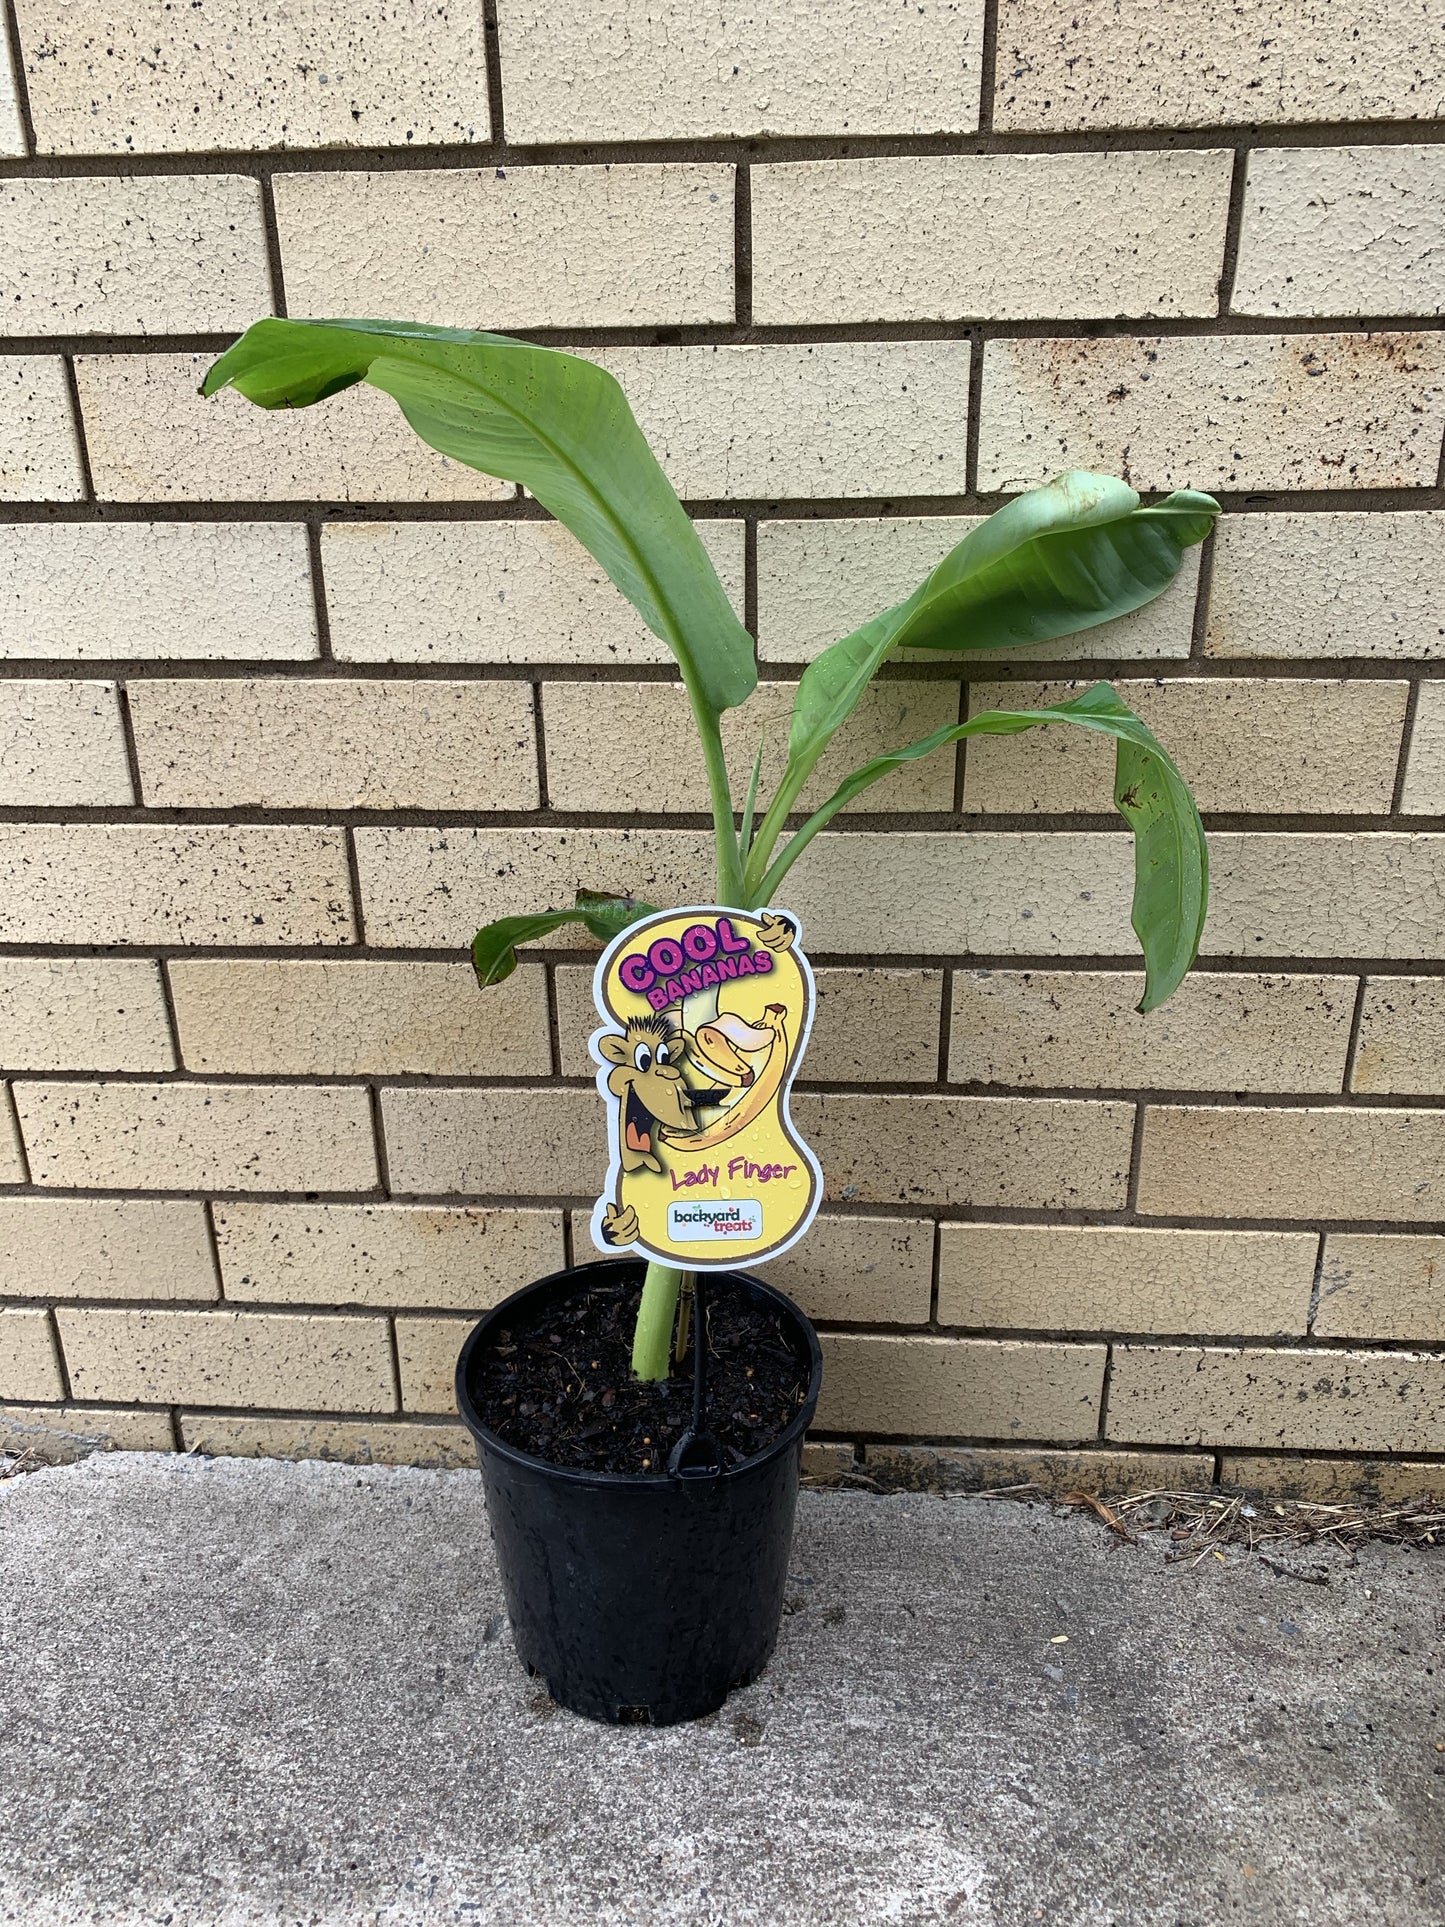 Banana - Lady Finger: RESTRICTED TO S.E. QLD